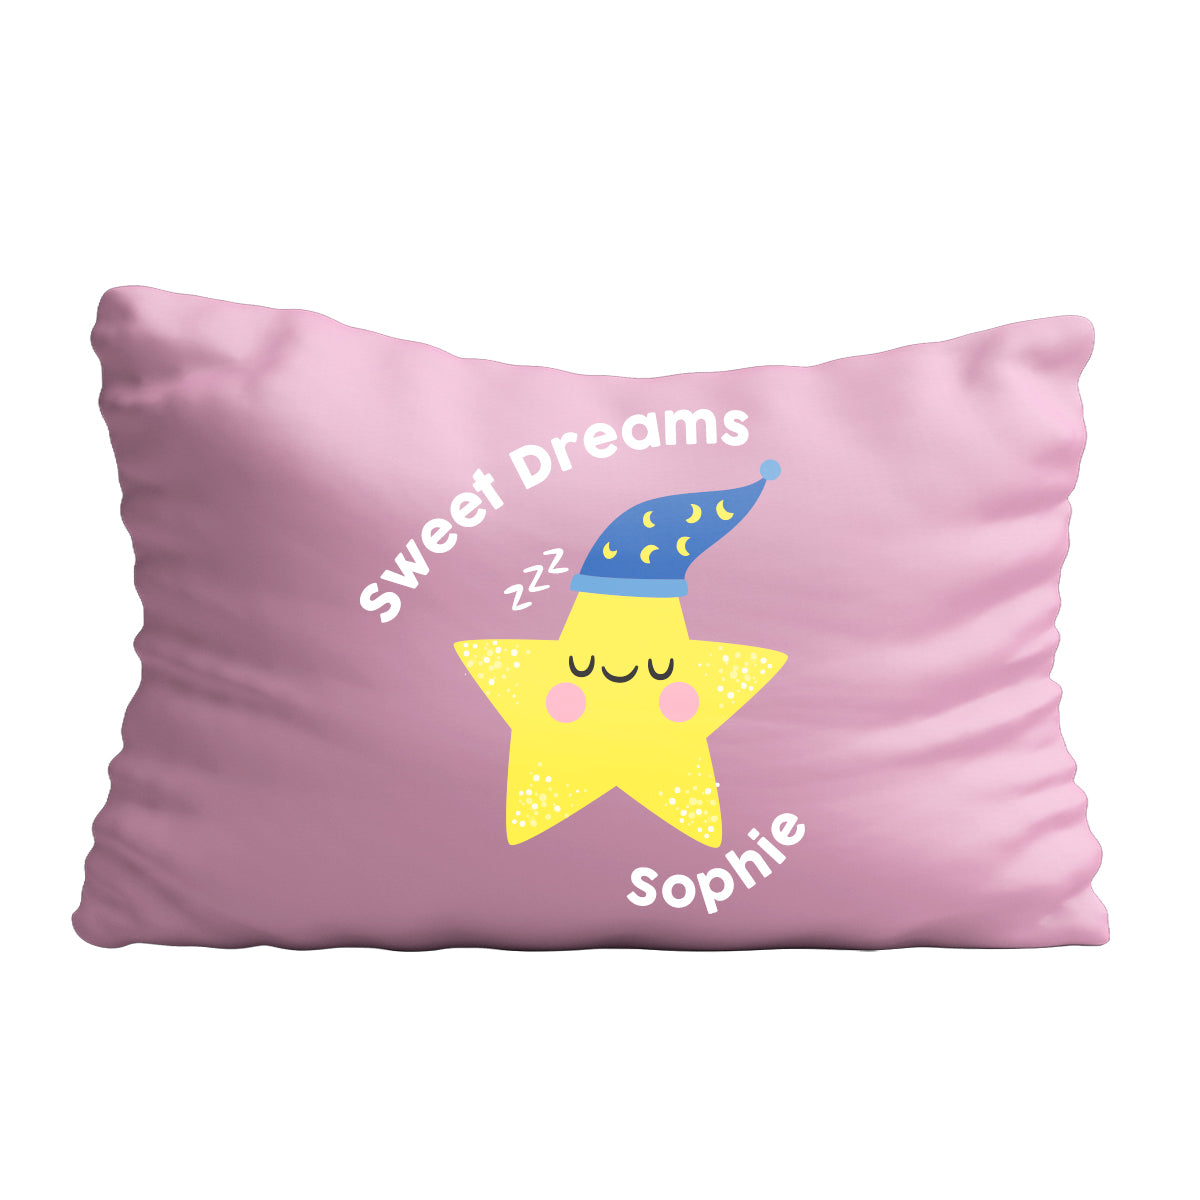 Sweet dreams name pink pillow case - Wimziy&Co.